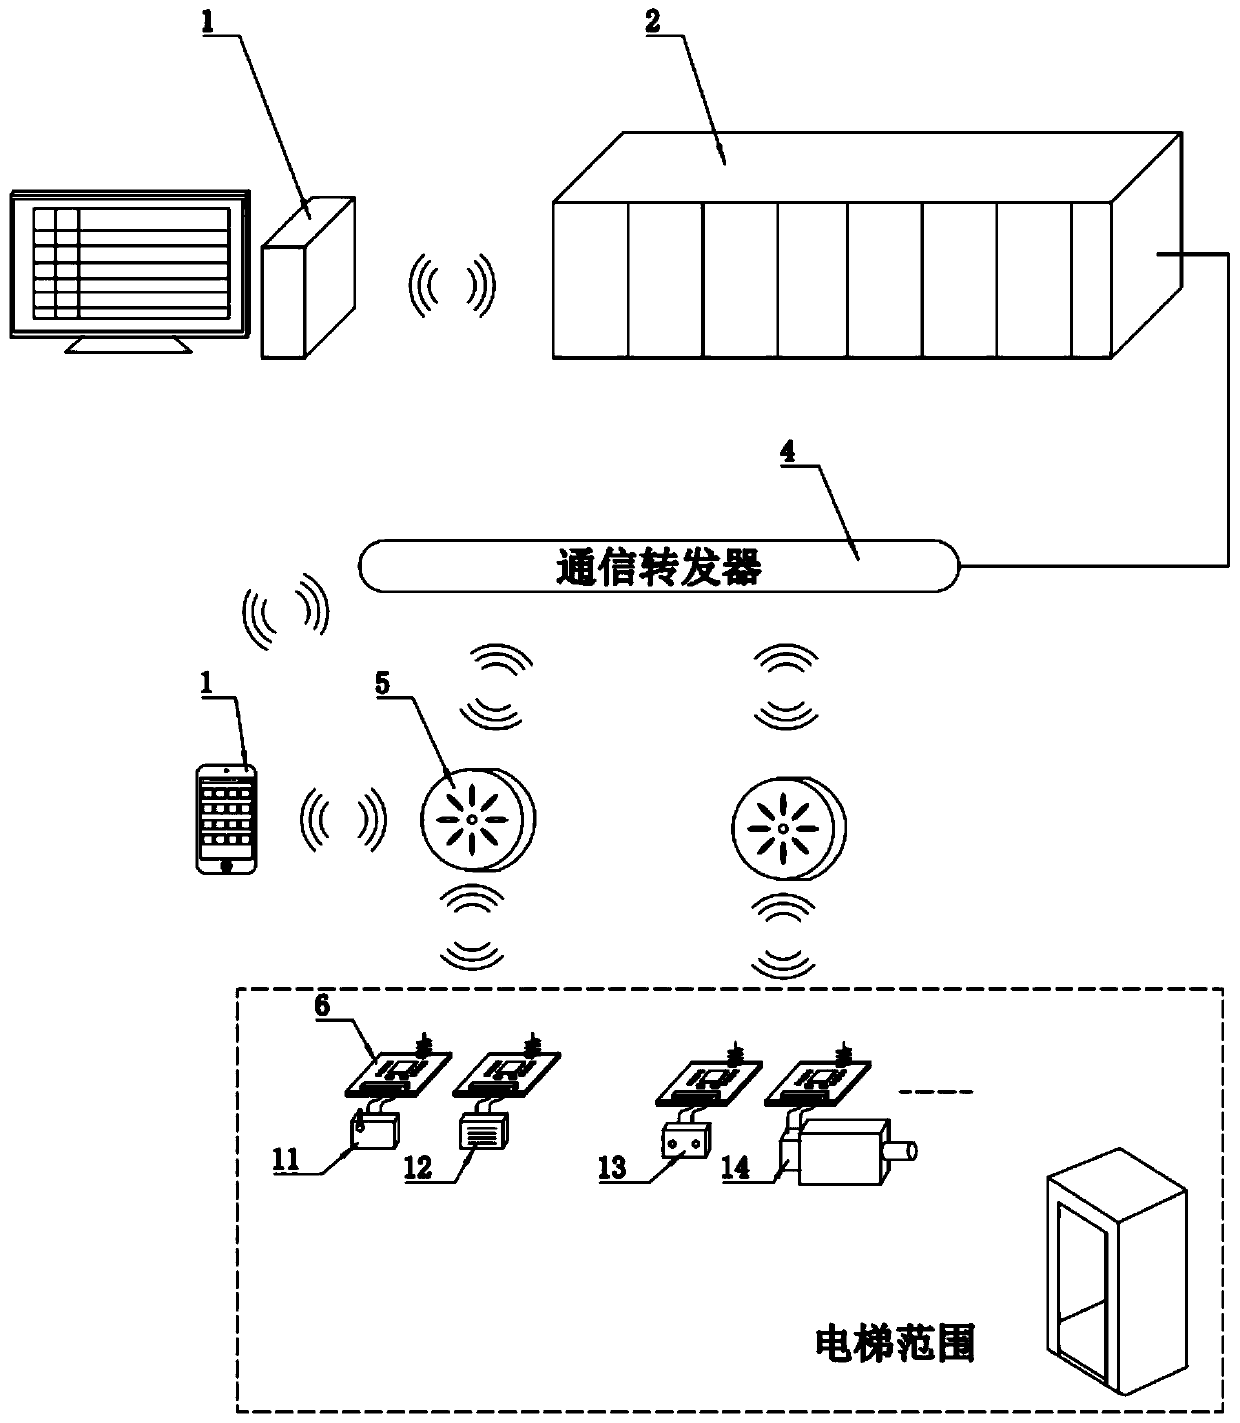 Elevator monitoring device and method based on Internet of things cloud platform